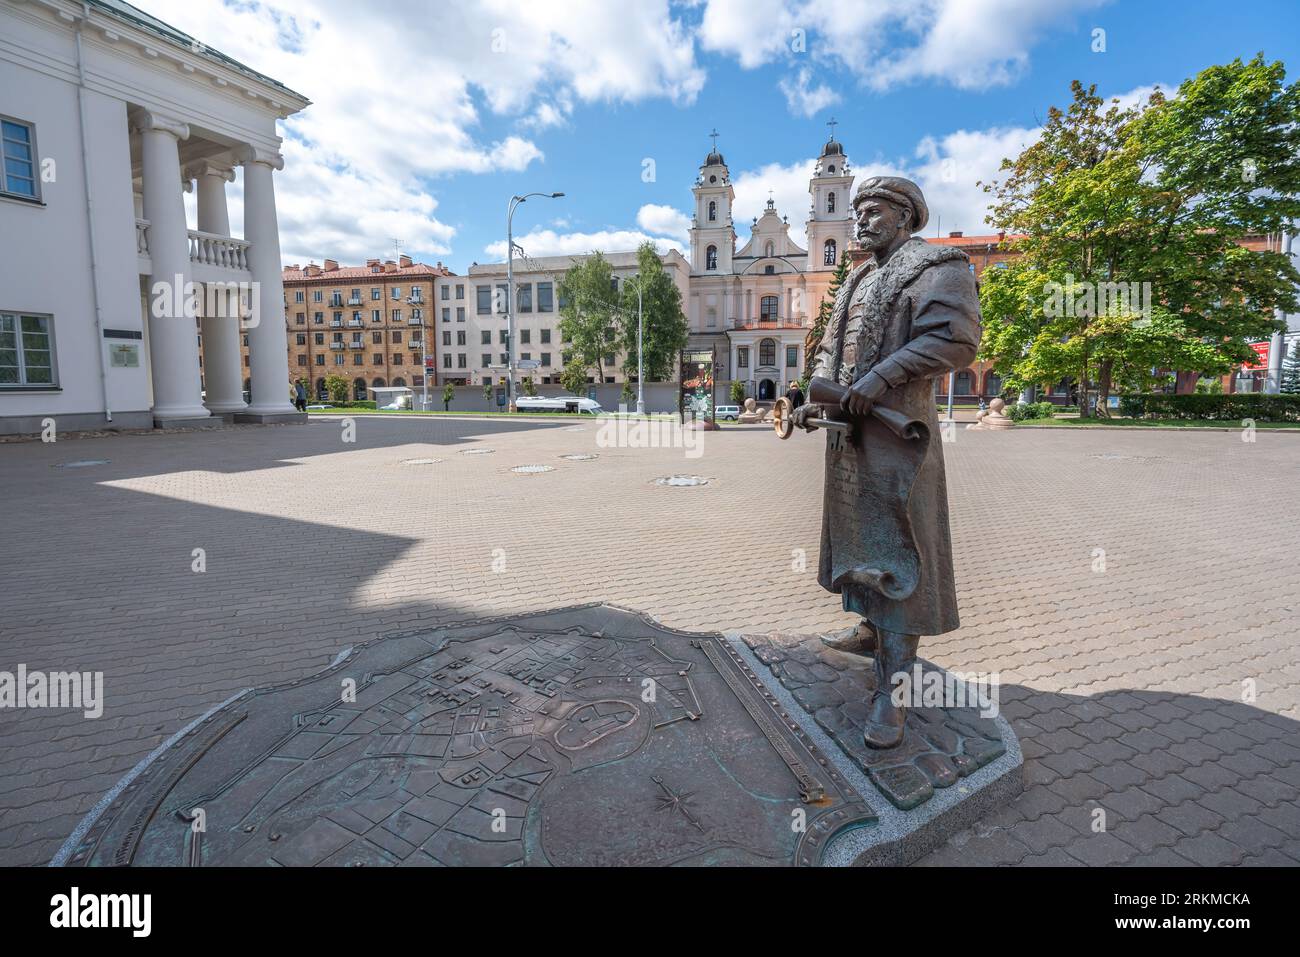 Statue of City Voit (magistrate) with key and royal letter in front of Minsk City Hall - Minsk, Belarus Stock Photo